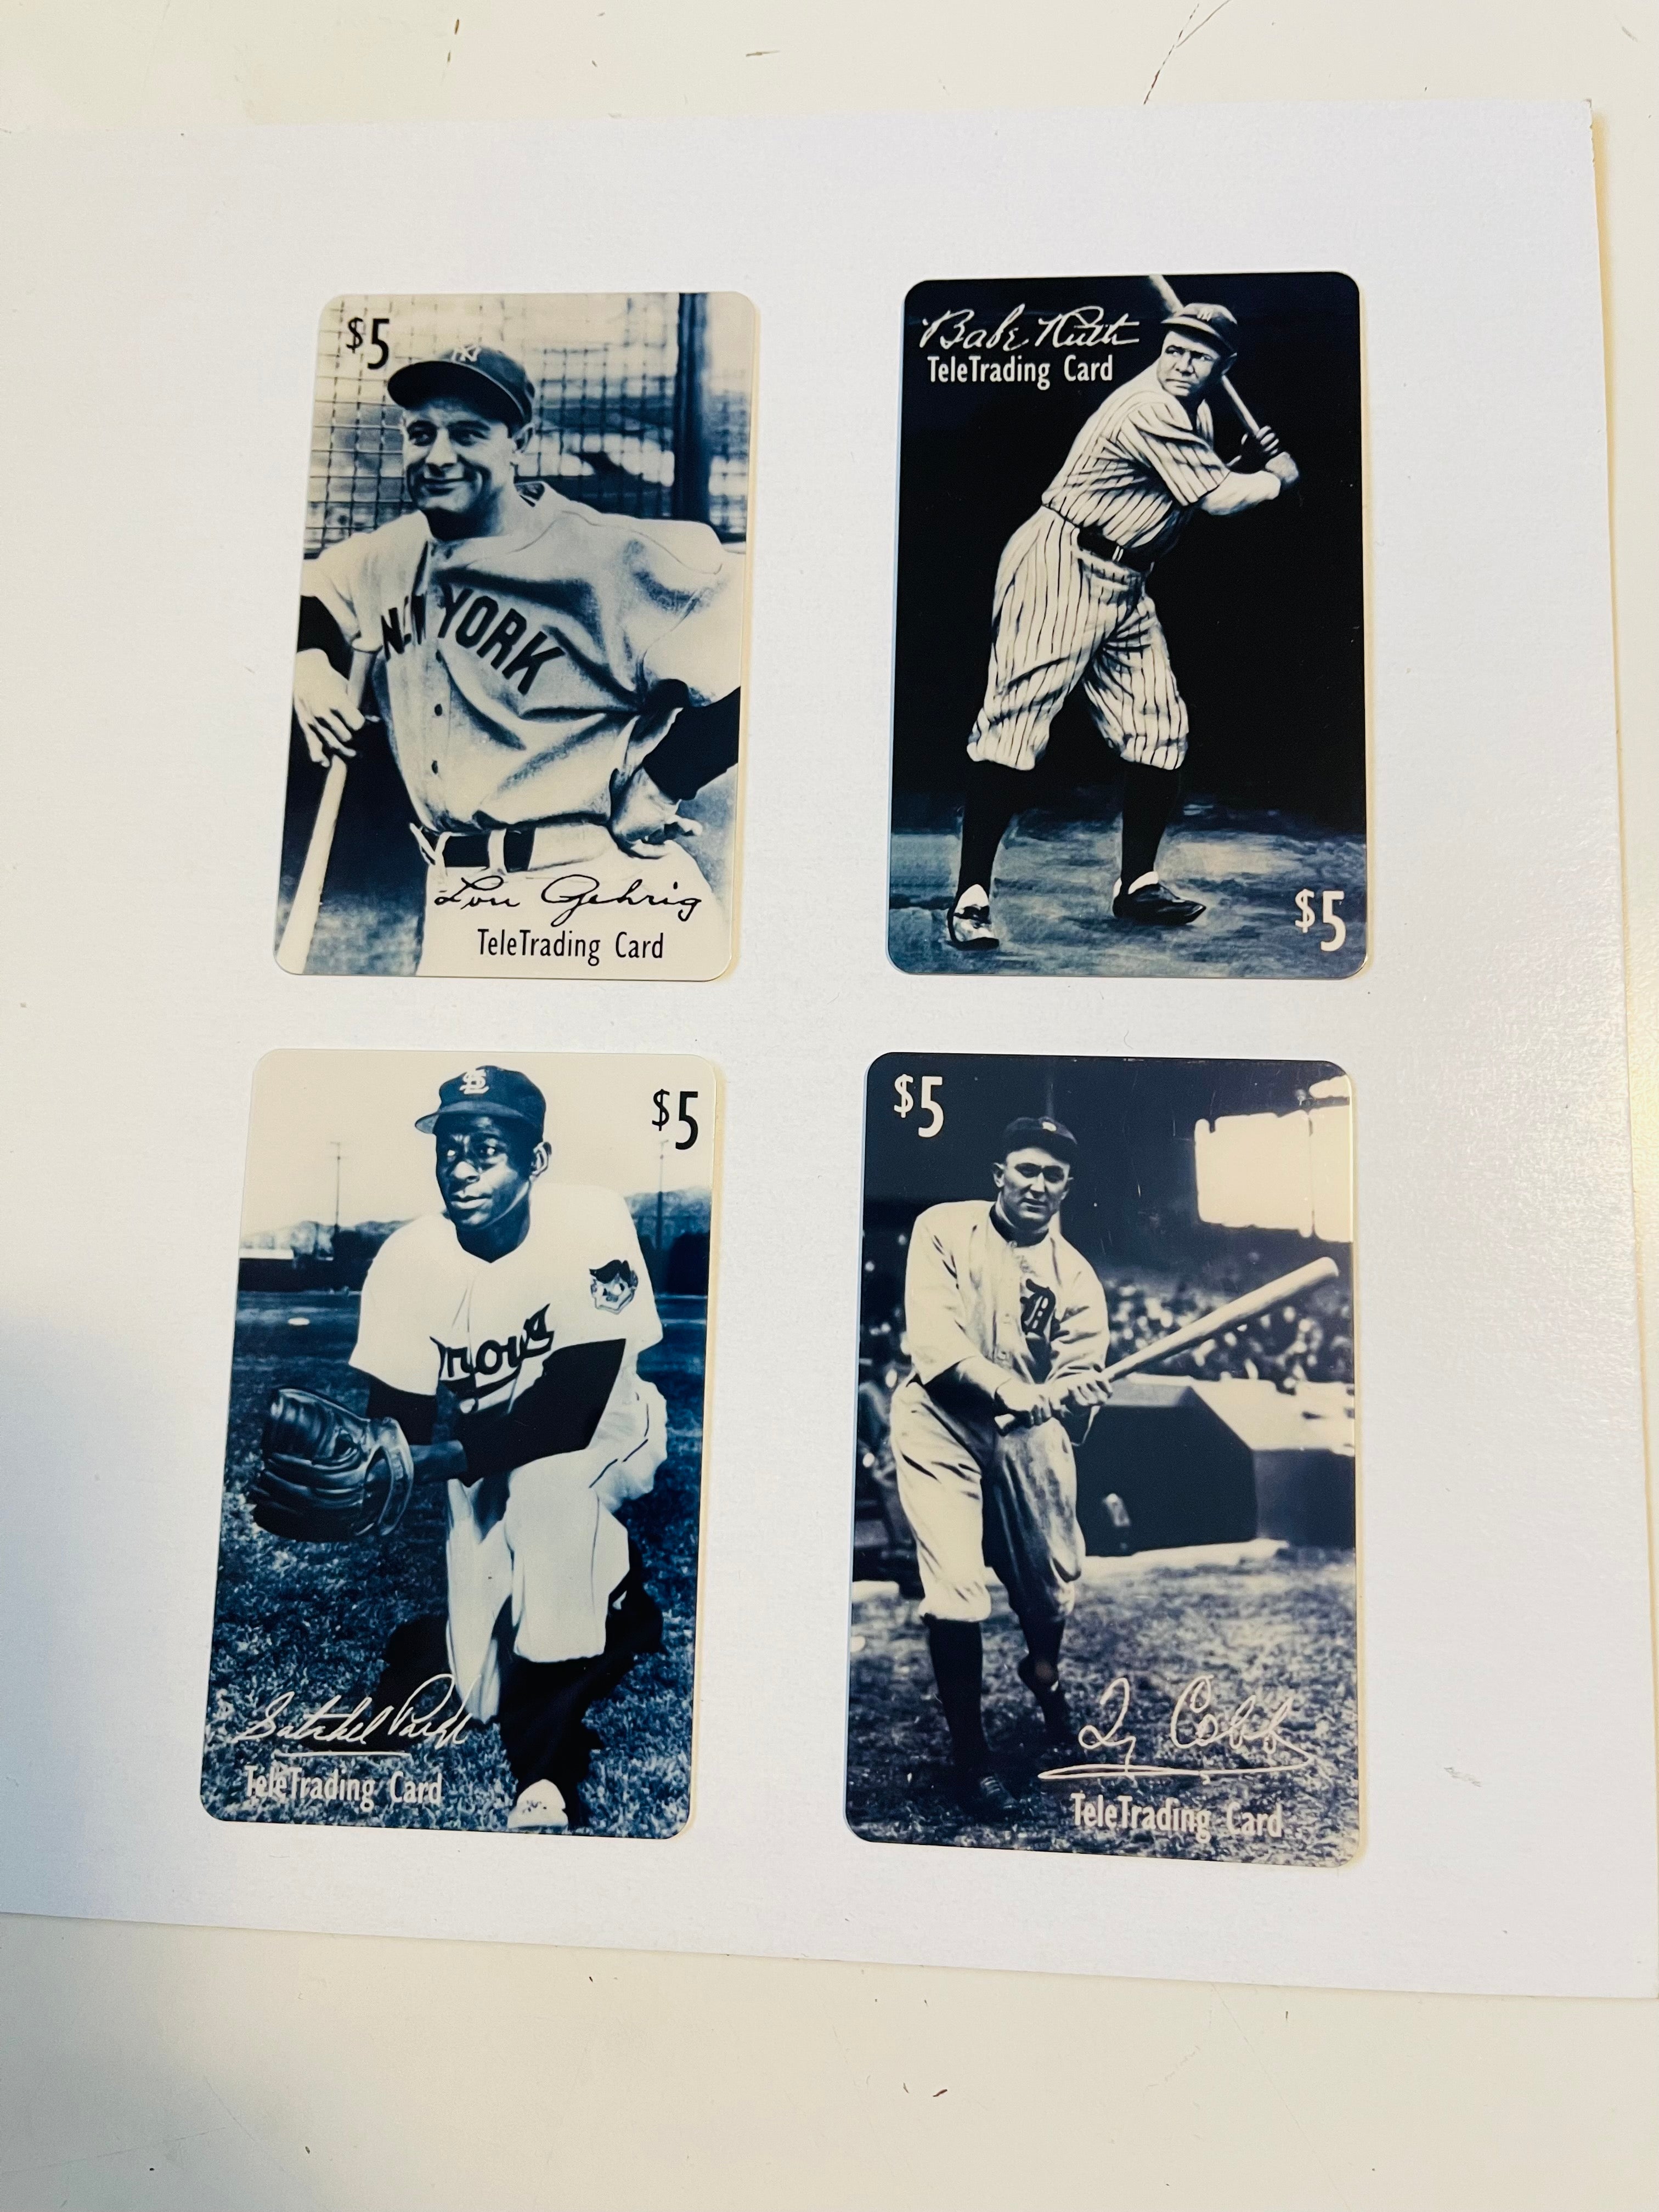 Babe Ruth, Ty Cobb and more 4 phonecards set 1990s